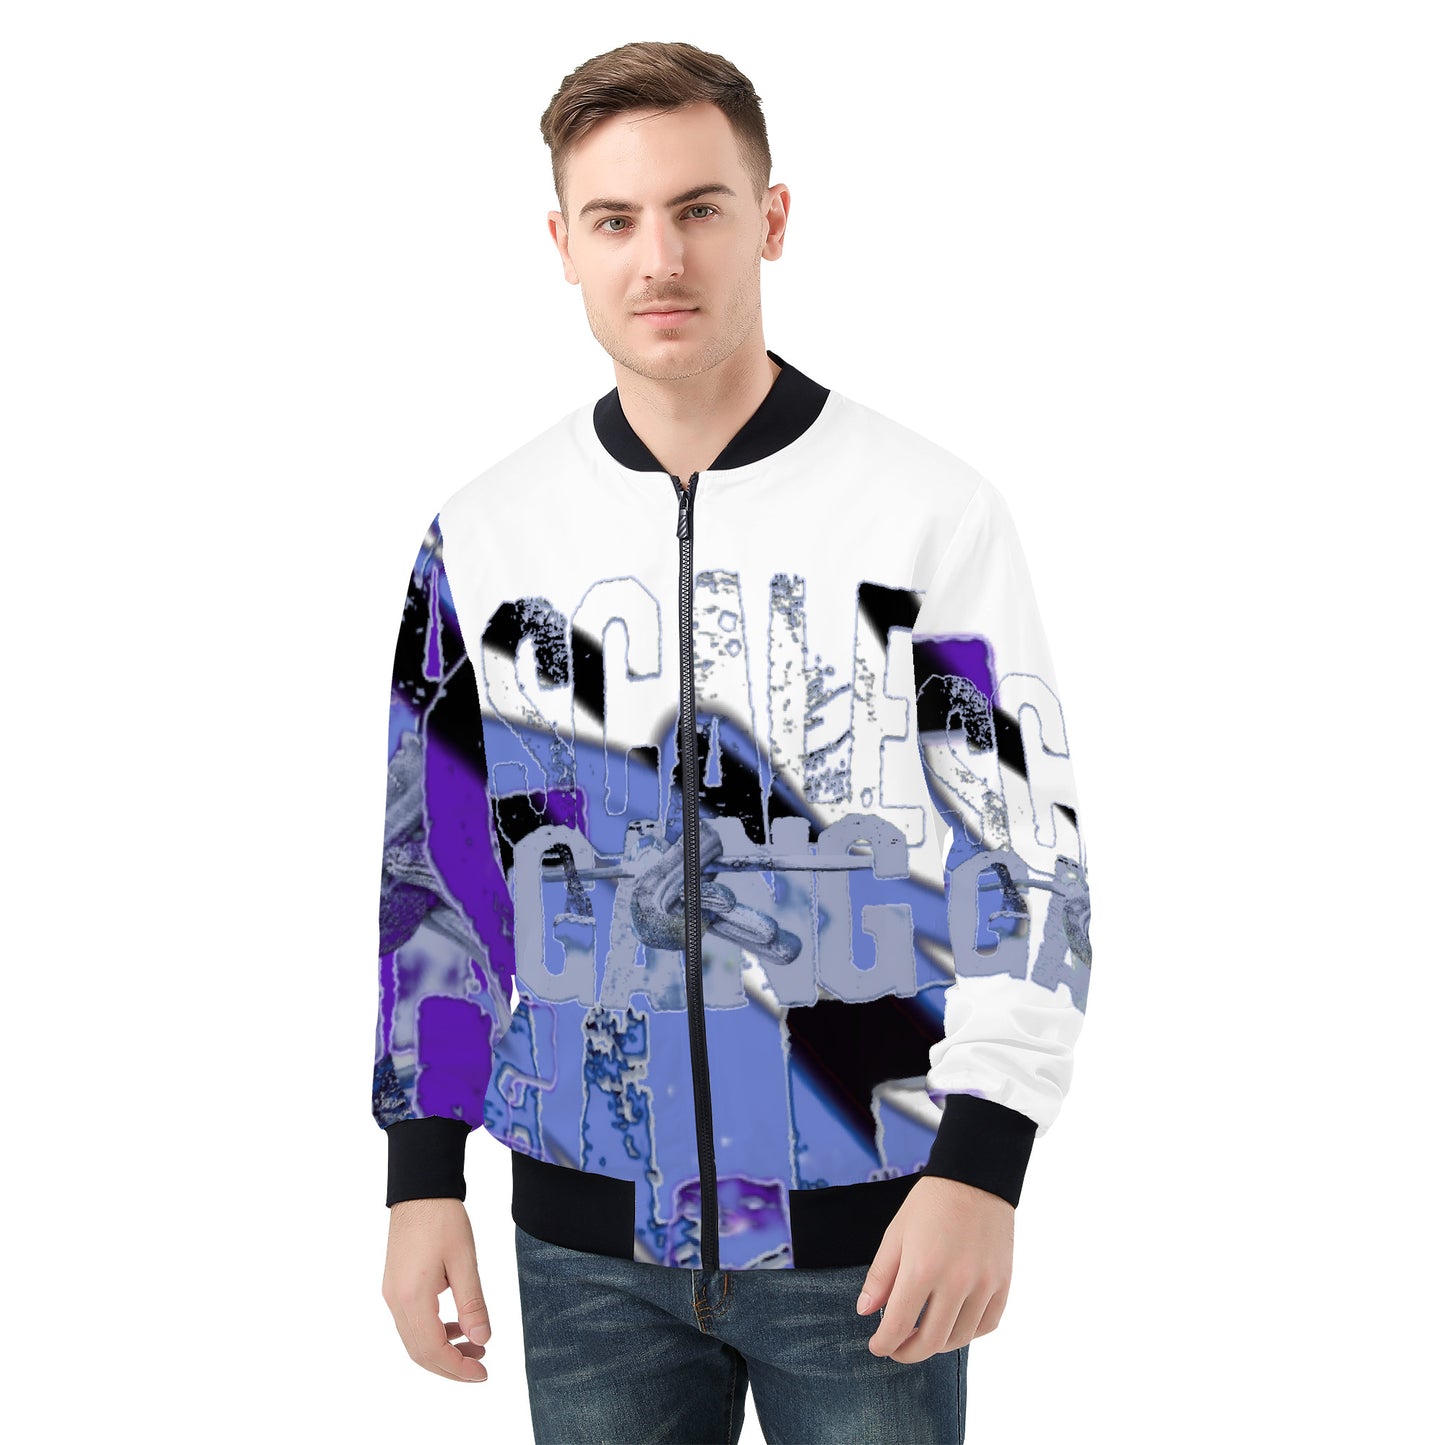 SG ABSTRACT Men's Bomber Jacket